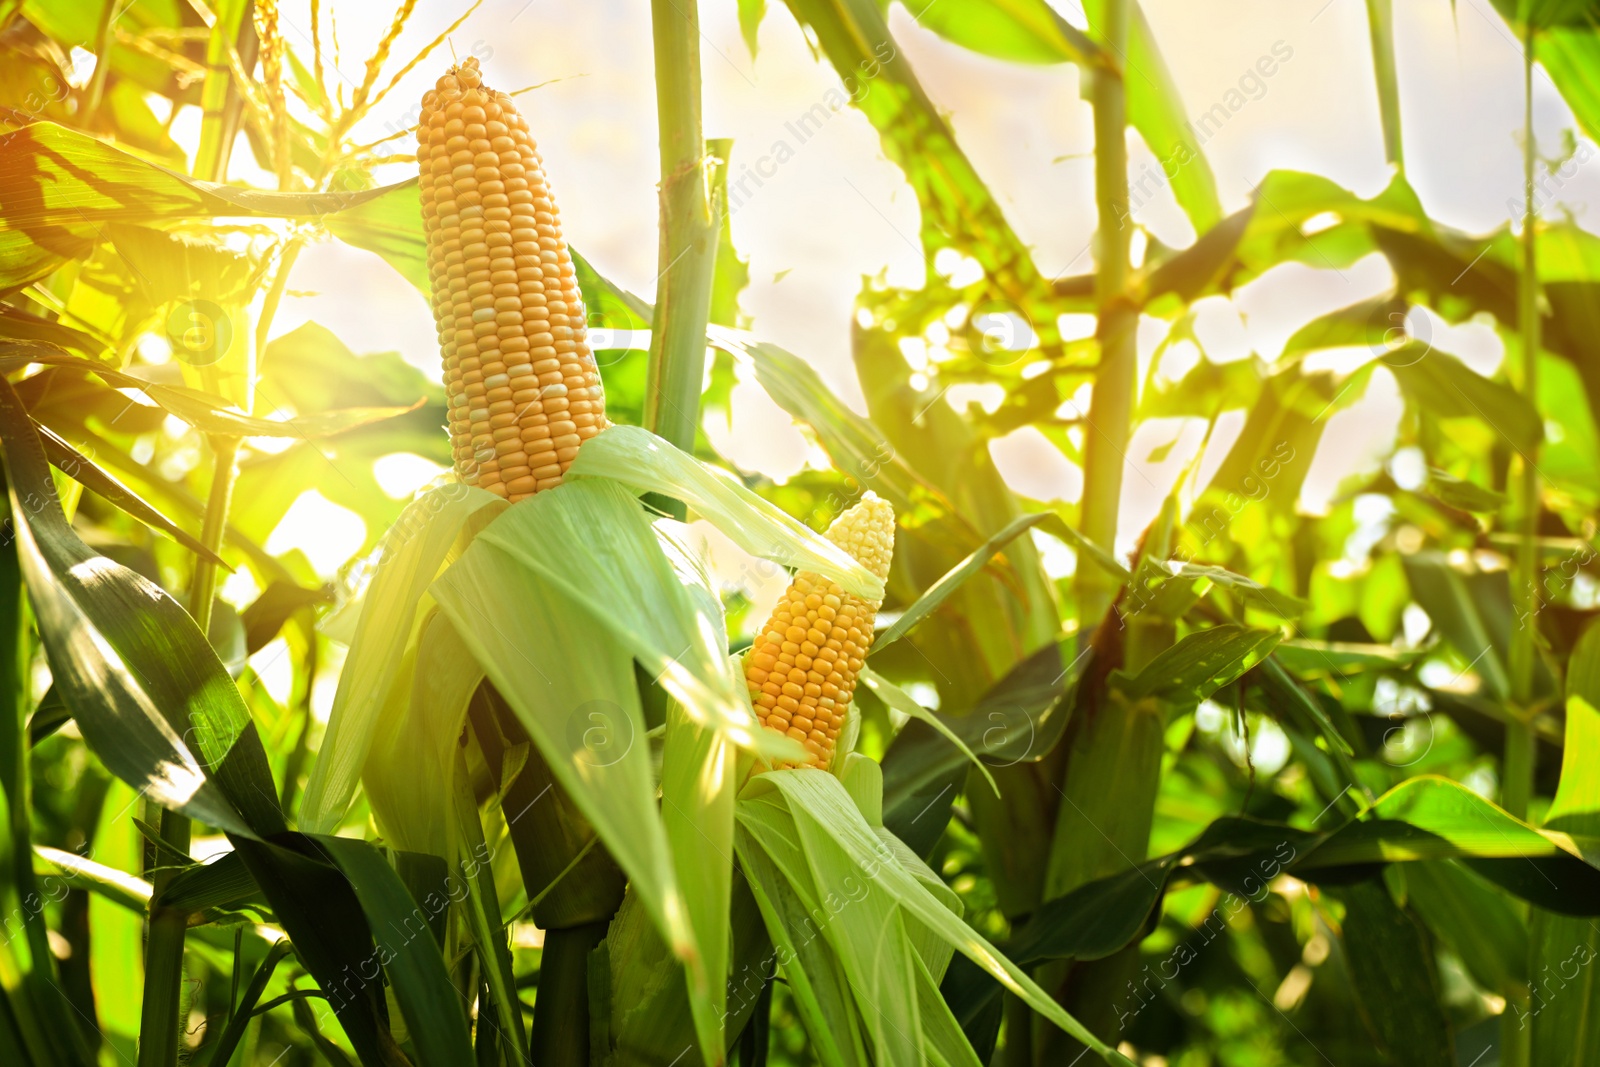 Image of Sunlit corn field with ripening cobs, closeup view